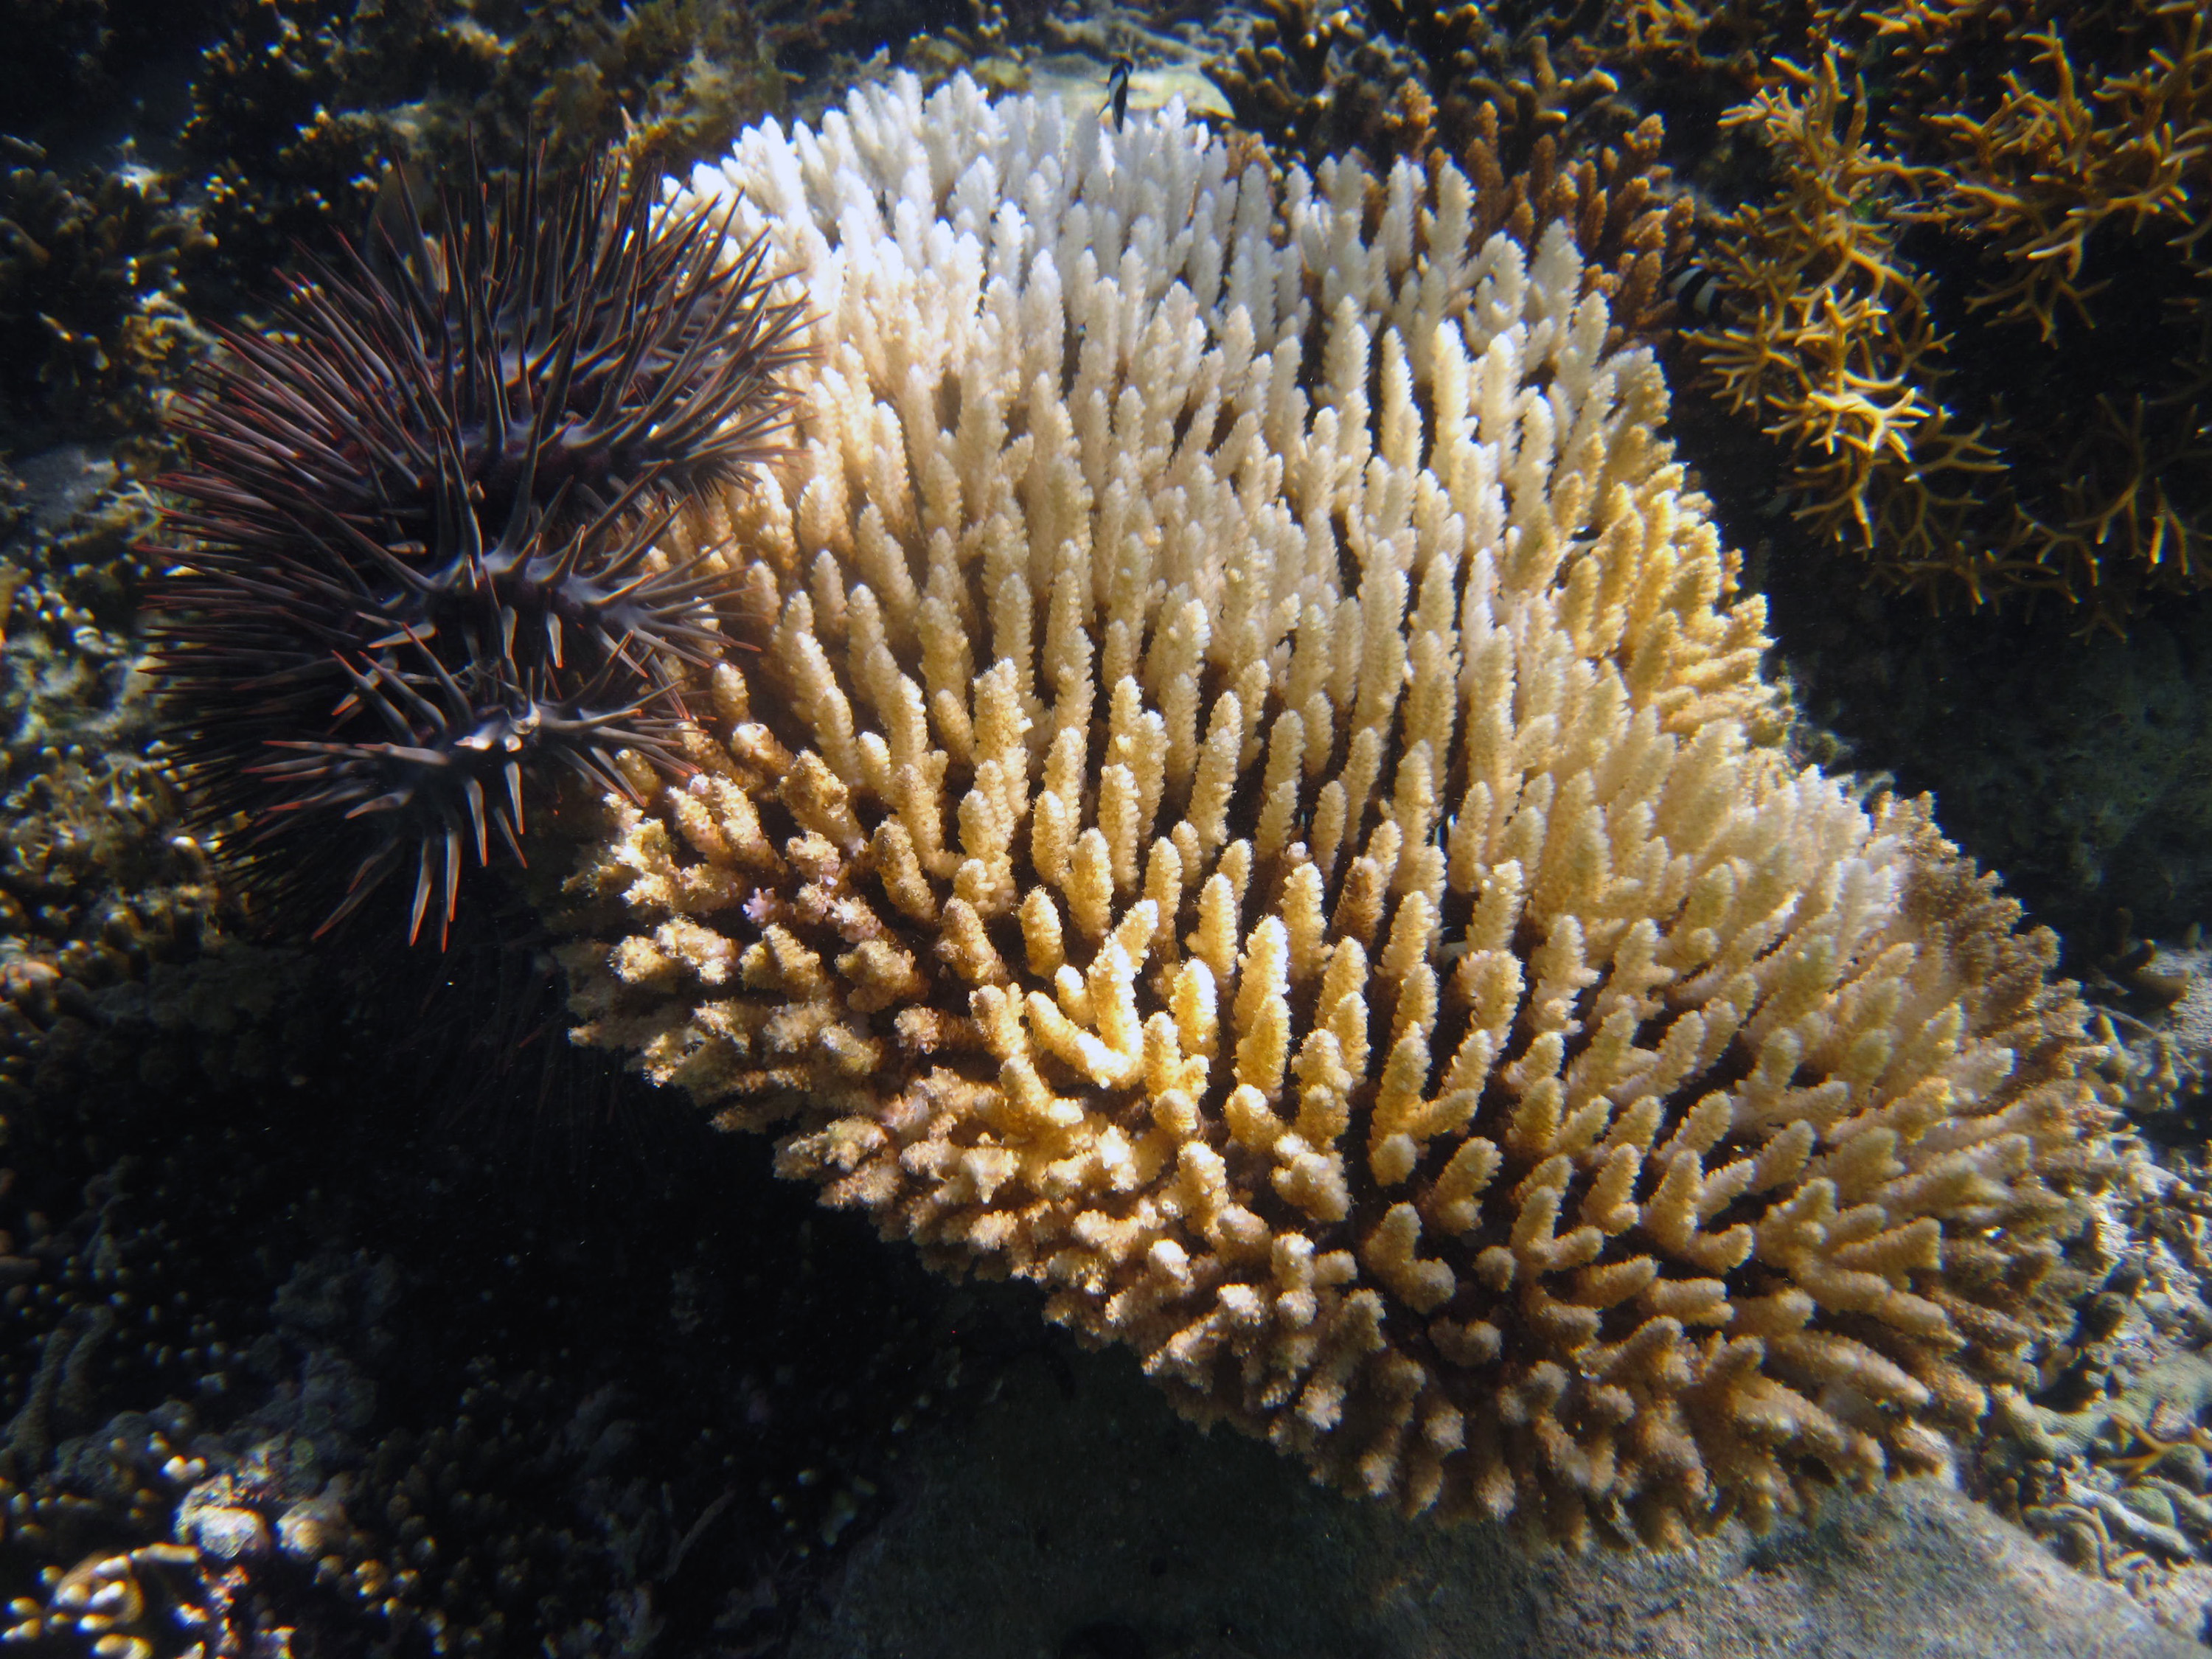 A crown-of-thorns sea star eating a coral from the genus Acropora, which is a preferred meal for the organism. The photos were taken in the non-protected fishing area on Votua Reef, on the Coral Coast of the Fiji Islands. (Credit: Cody Clements, Georgia Tech)